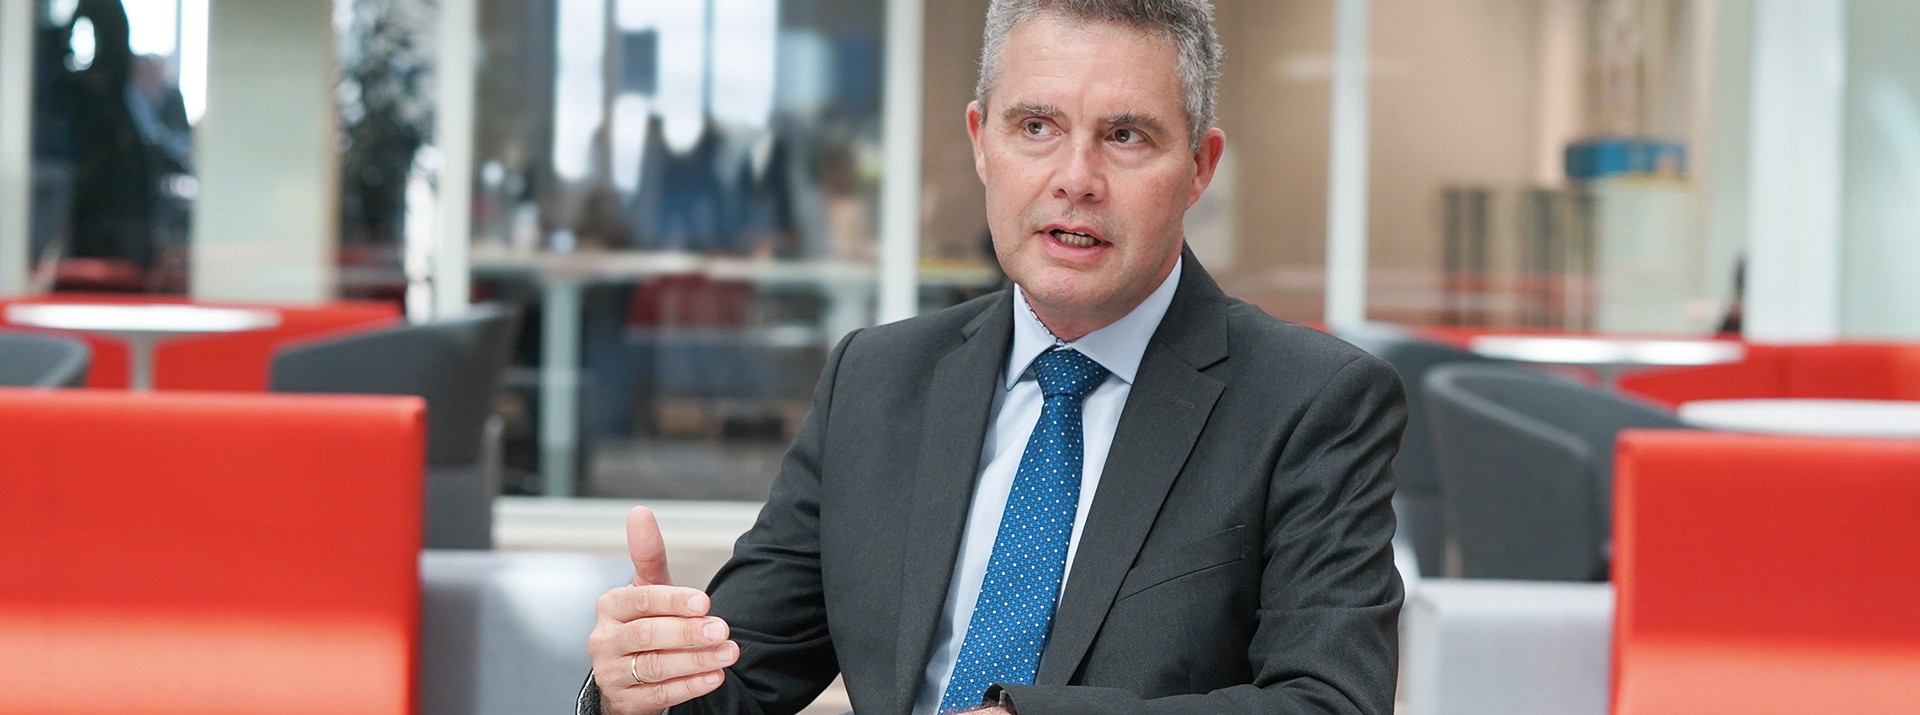 Dr. Jonathan Paddison, Member of the Executive Board of Knorr-Bremse Asia Pacific, based in Hong Kong, China, sits in the lounge area at the company's headquarters in Munich and answers interview questions.